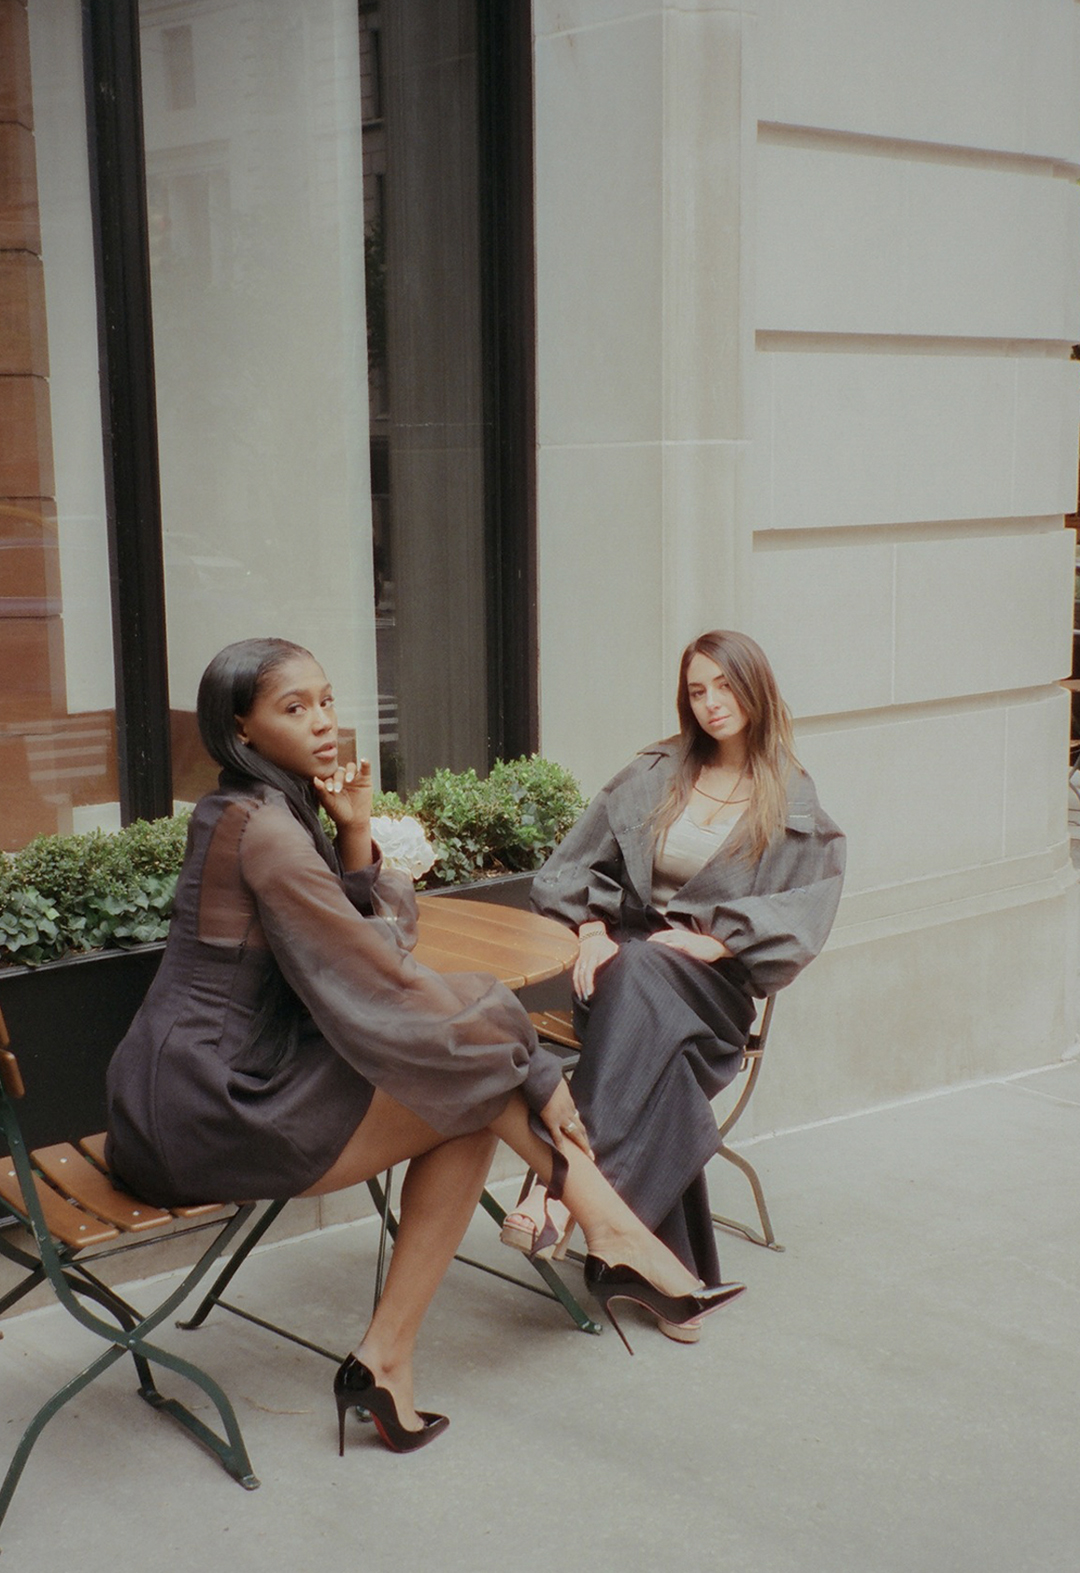 Two models sitting outside at a small table in an urban setting. The model on the left is looking at the camera. She is wearing a dress with heels. The model on the right is wearing pants and a bomber blazer.